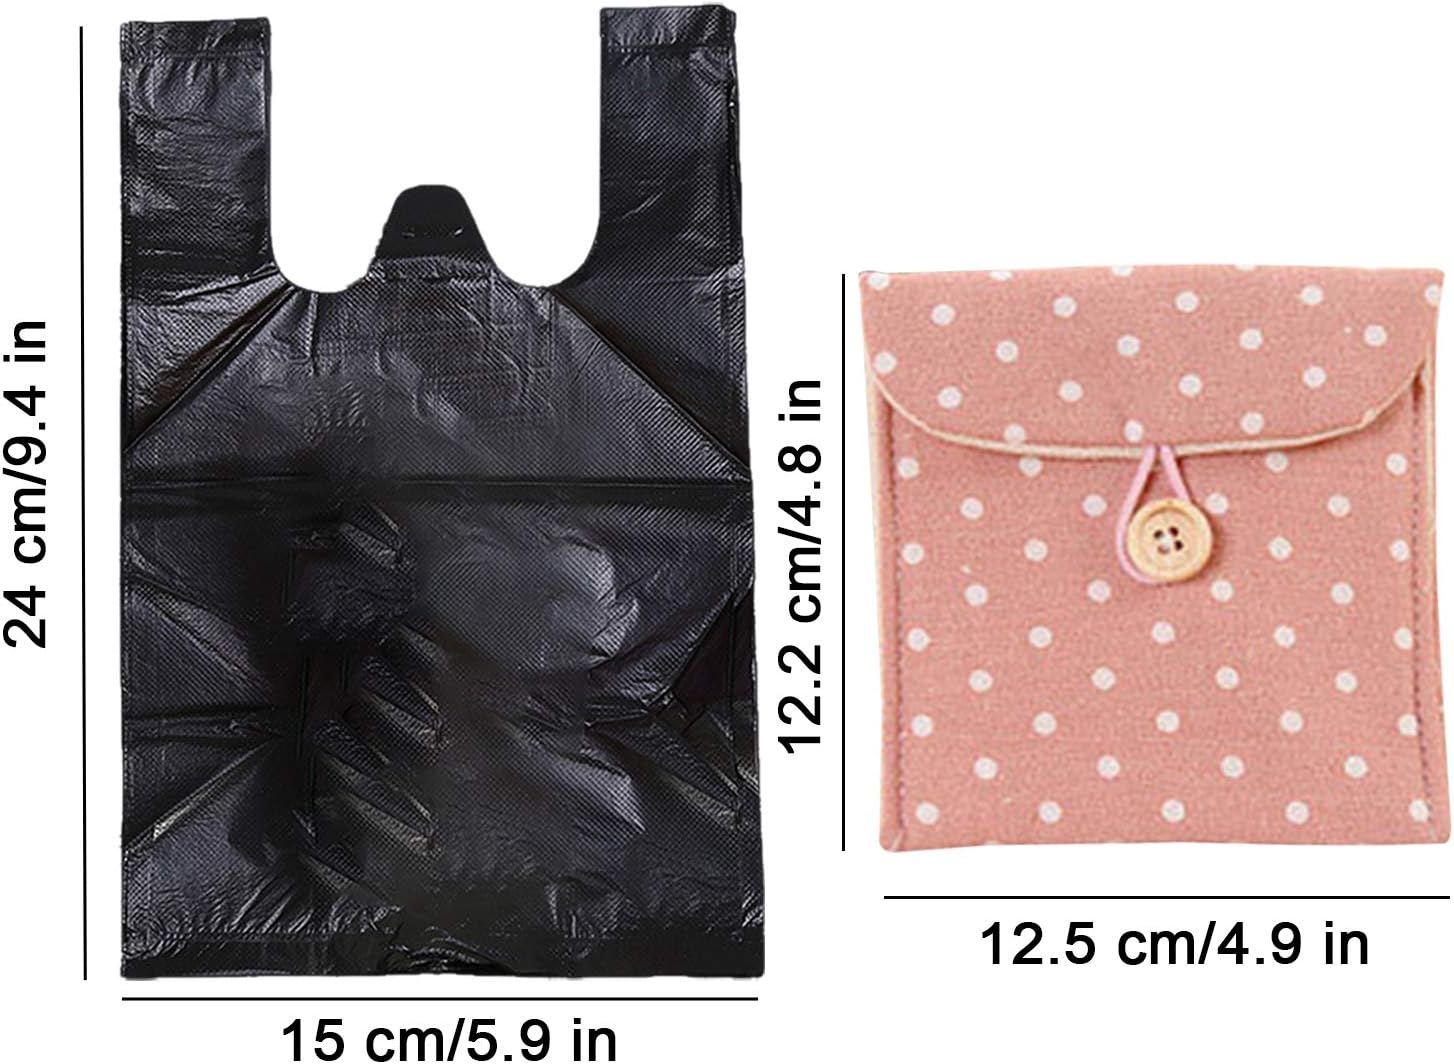 Hipruict Sanitary Napkin Bags, 200 Pcs Personal Disposal Bags for Women, 2 Sanitary Napkin Storage Bags, Trash Bags with Handle for Feminine Hygiene Product - Black : Health & Household